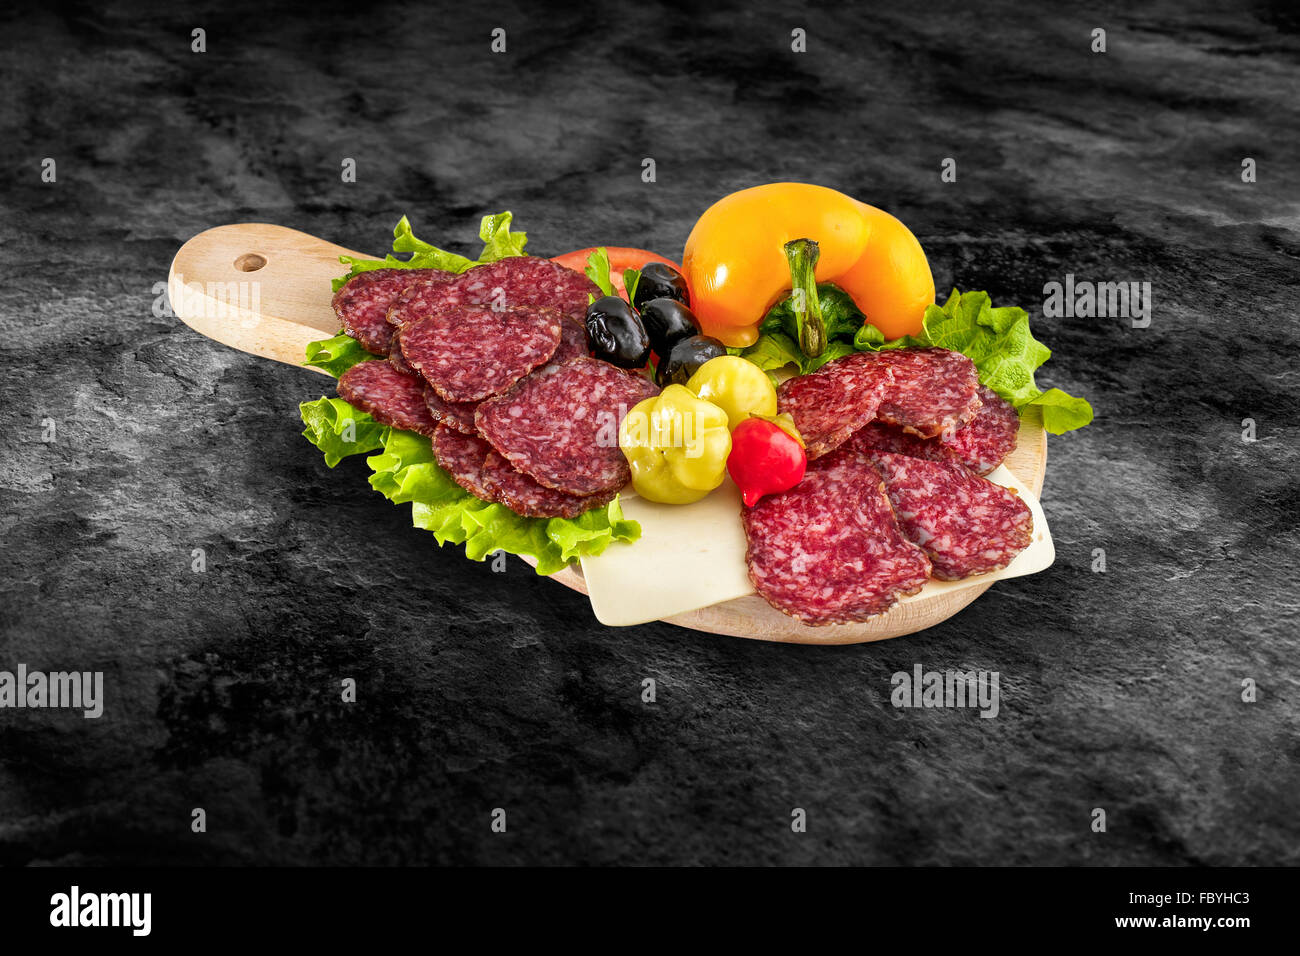 Salami sausage slice and vegetables on wooden board with clipping path Stock Photo